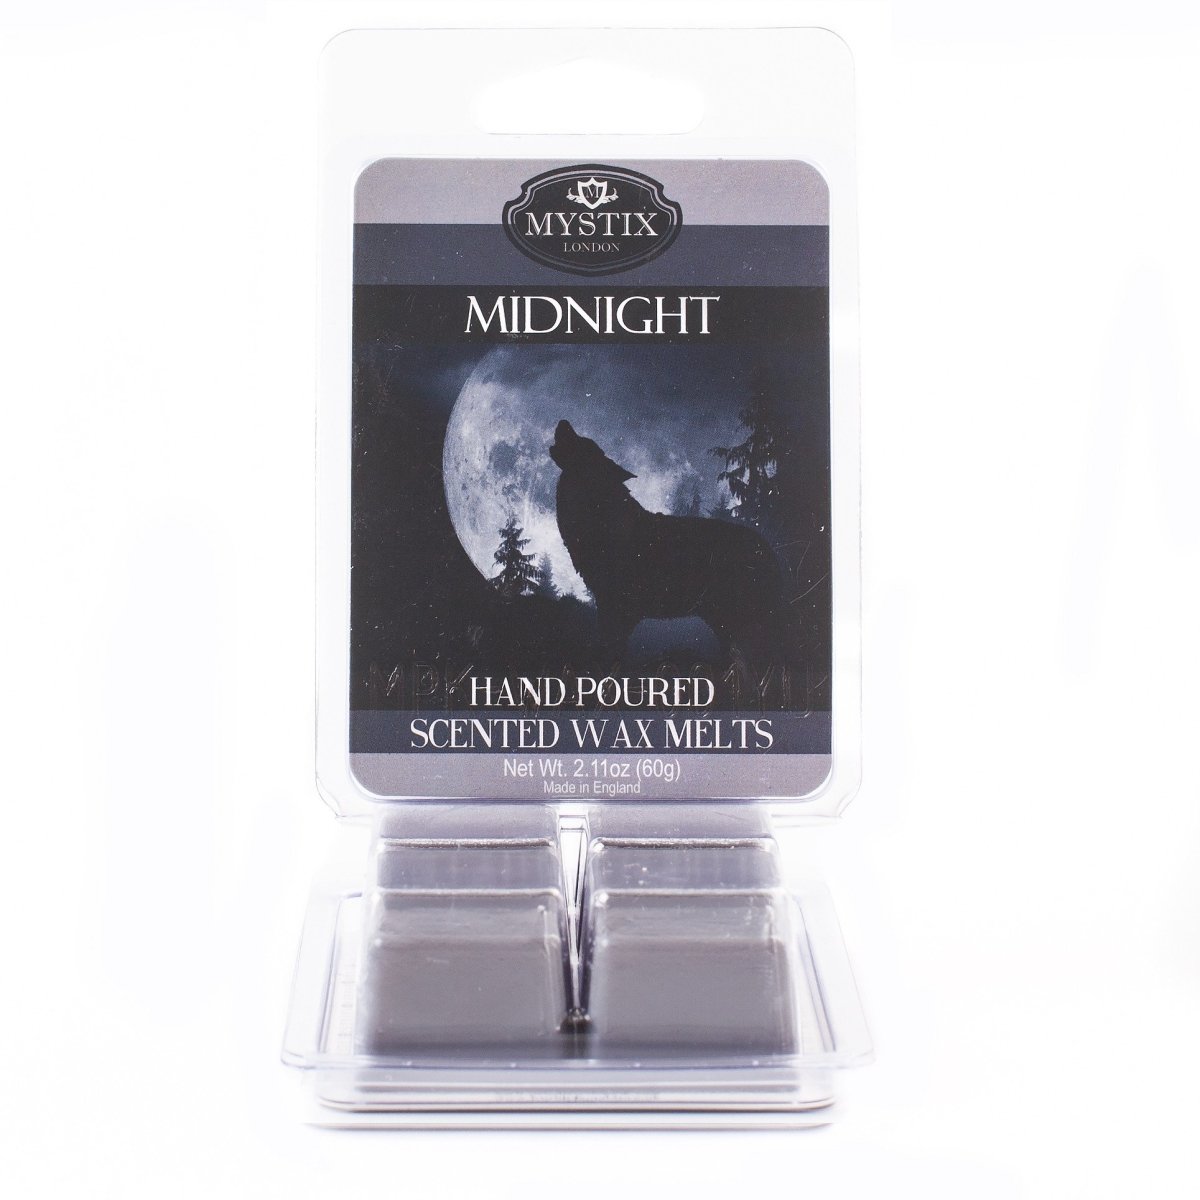 Midnight | Scented Wax Melt Clamshell - Mystic Moments UK